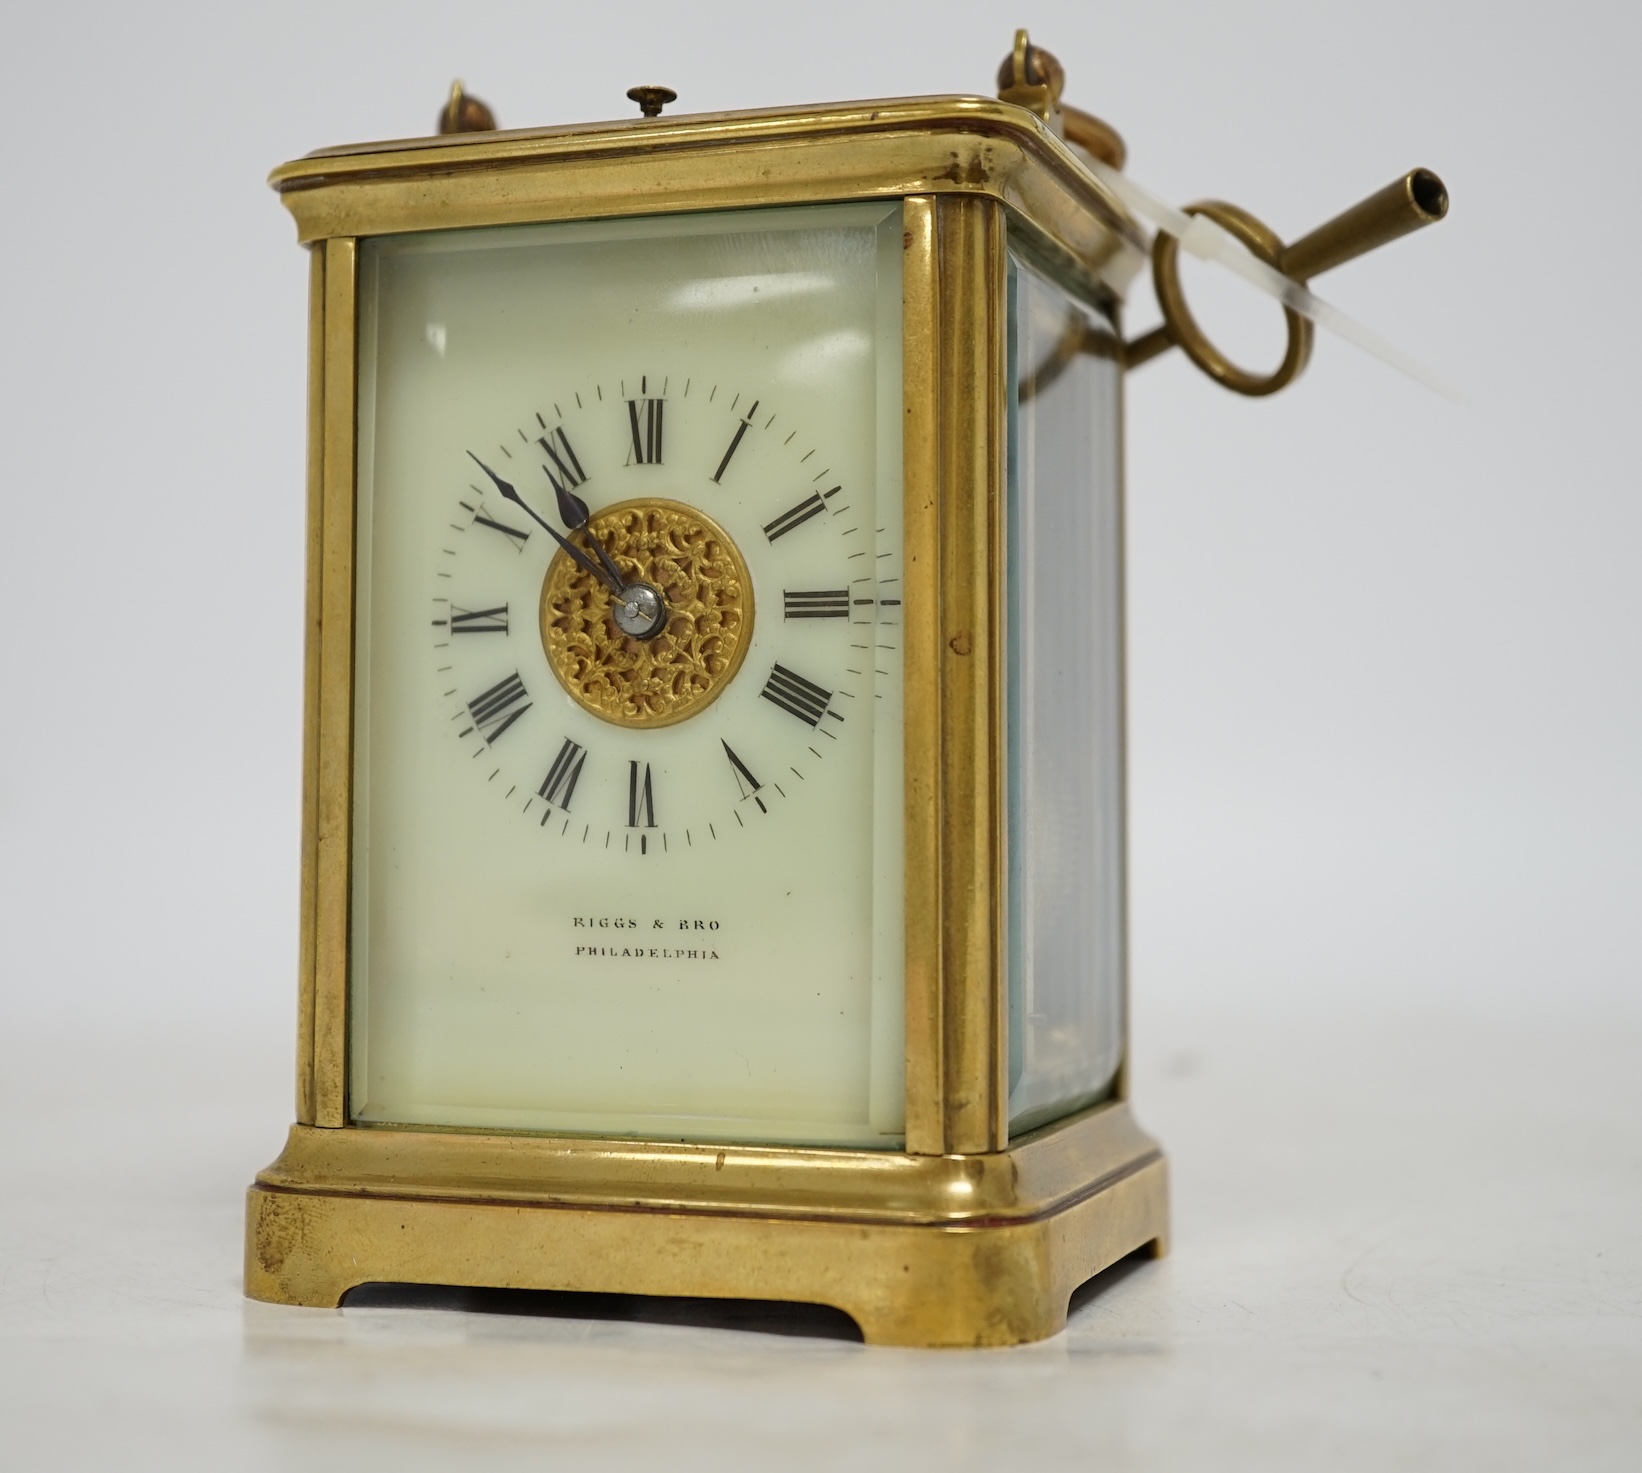 A brass cased repeating carriage clock with key, 14cm. Condition - good, currently ticking